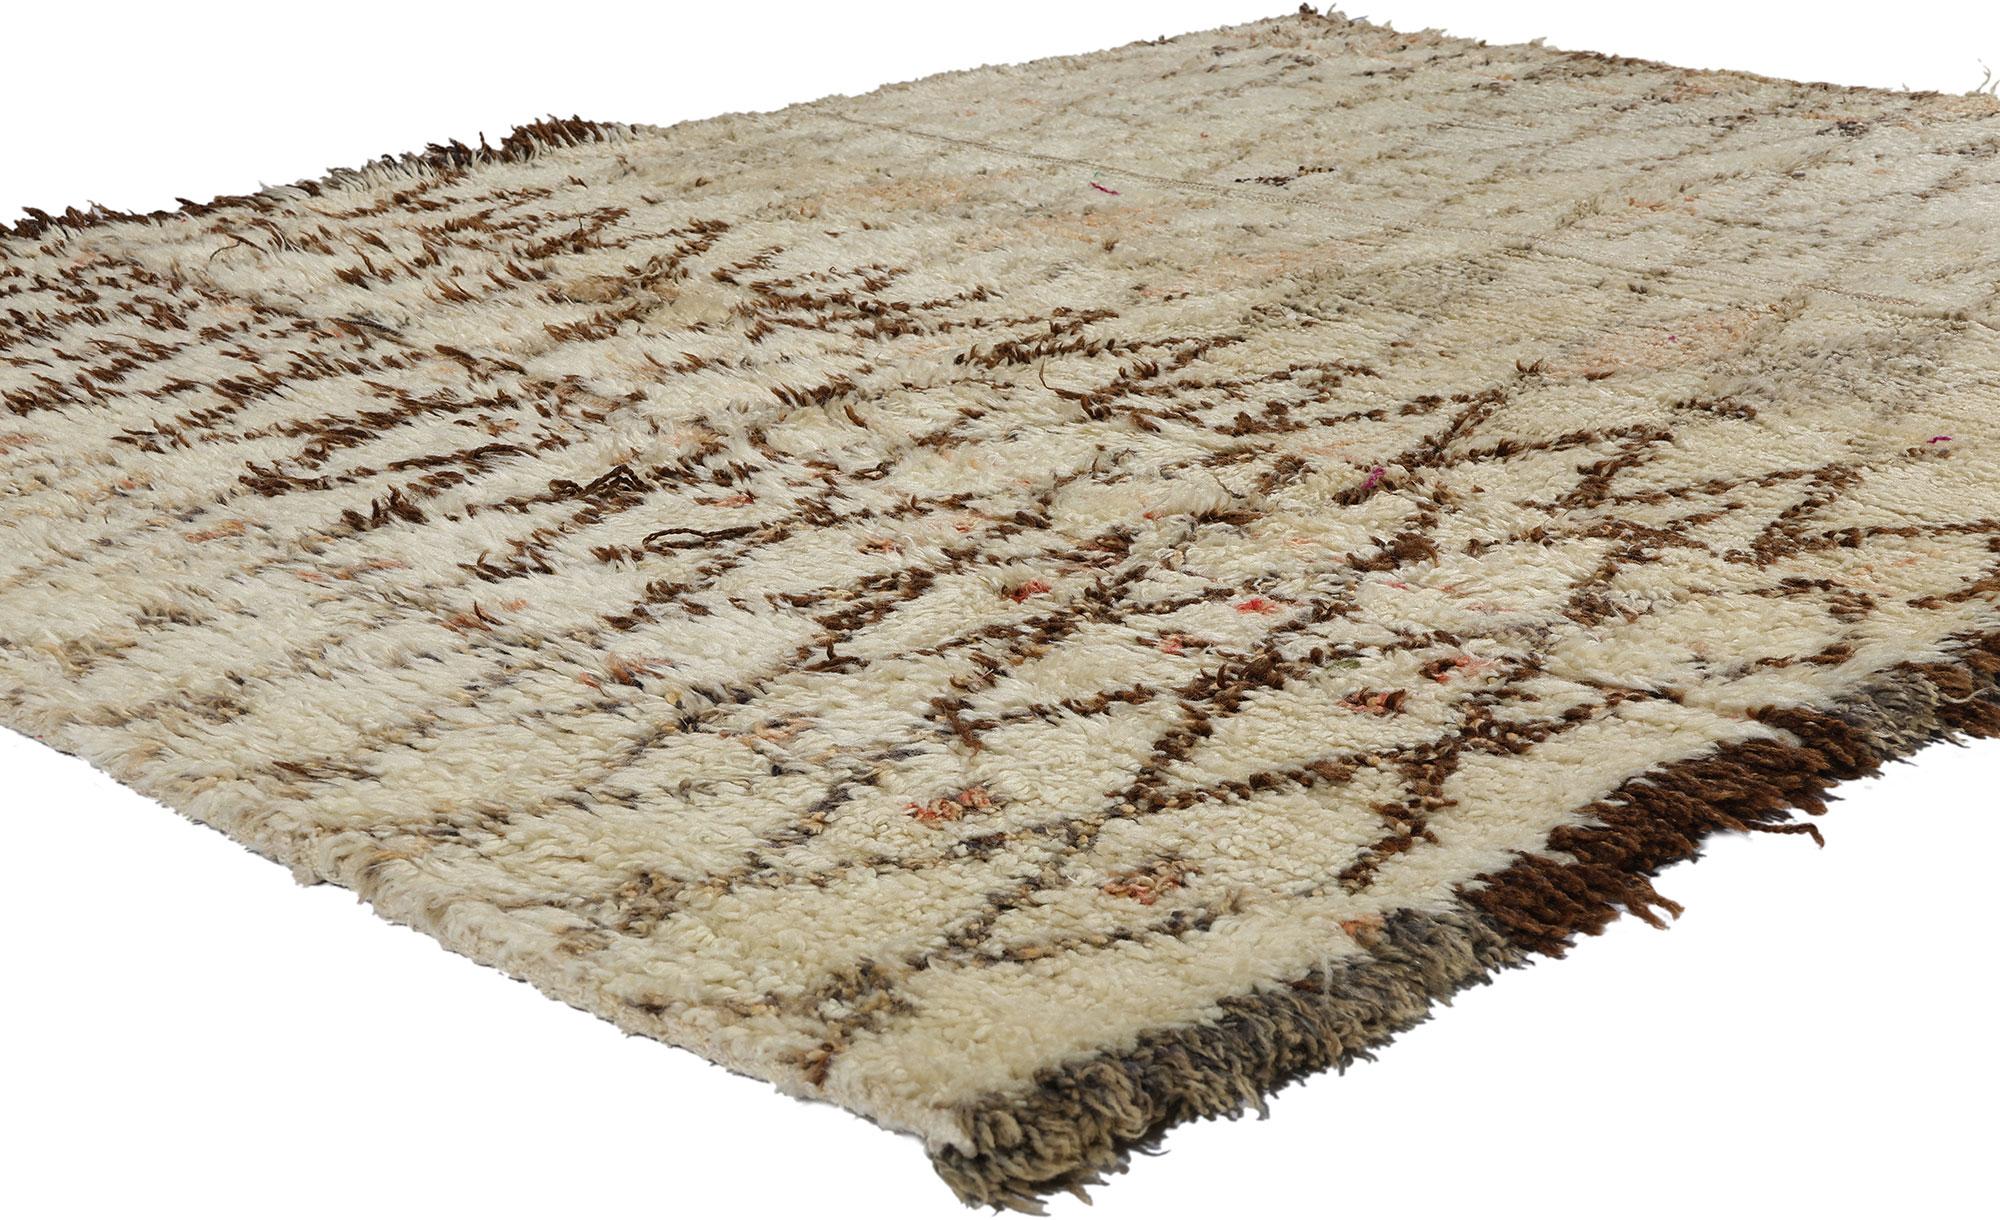 21719 Vintage Moroccan Beni Ourain Rug, 05'03 x 06'09. Originating from the esteemed Beni Ourain tribe in Morocco, these intricately crafted rugs pay homage to tradition through meticulous craftsmanship. Fashioned from untreated sheep's wool, they